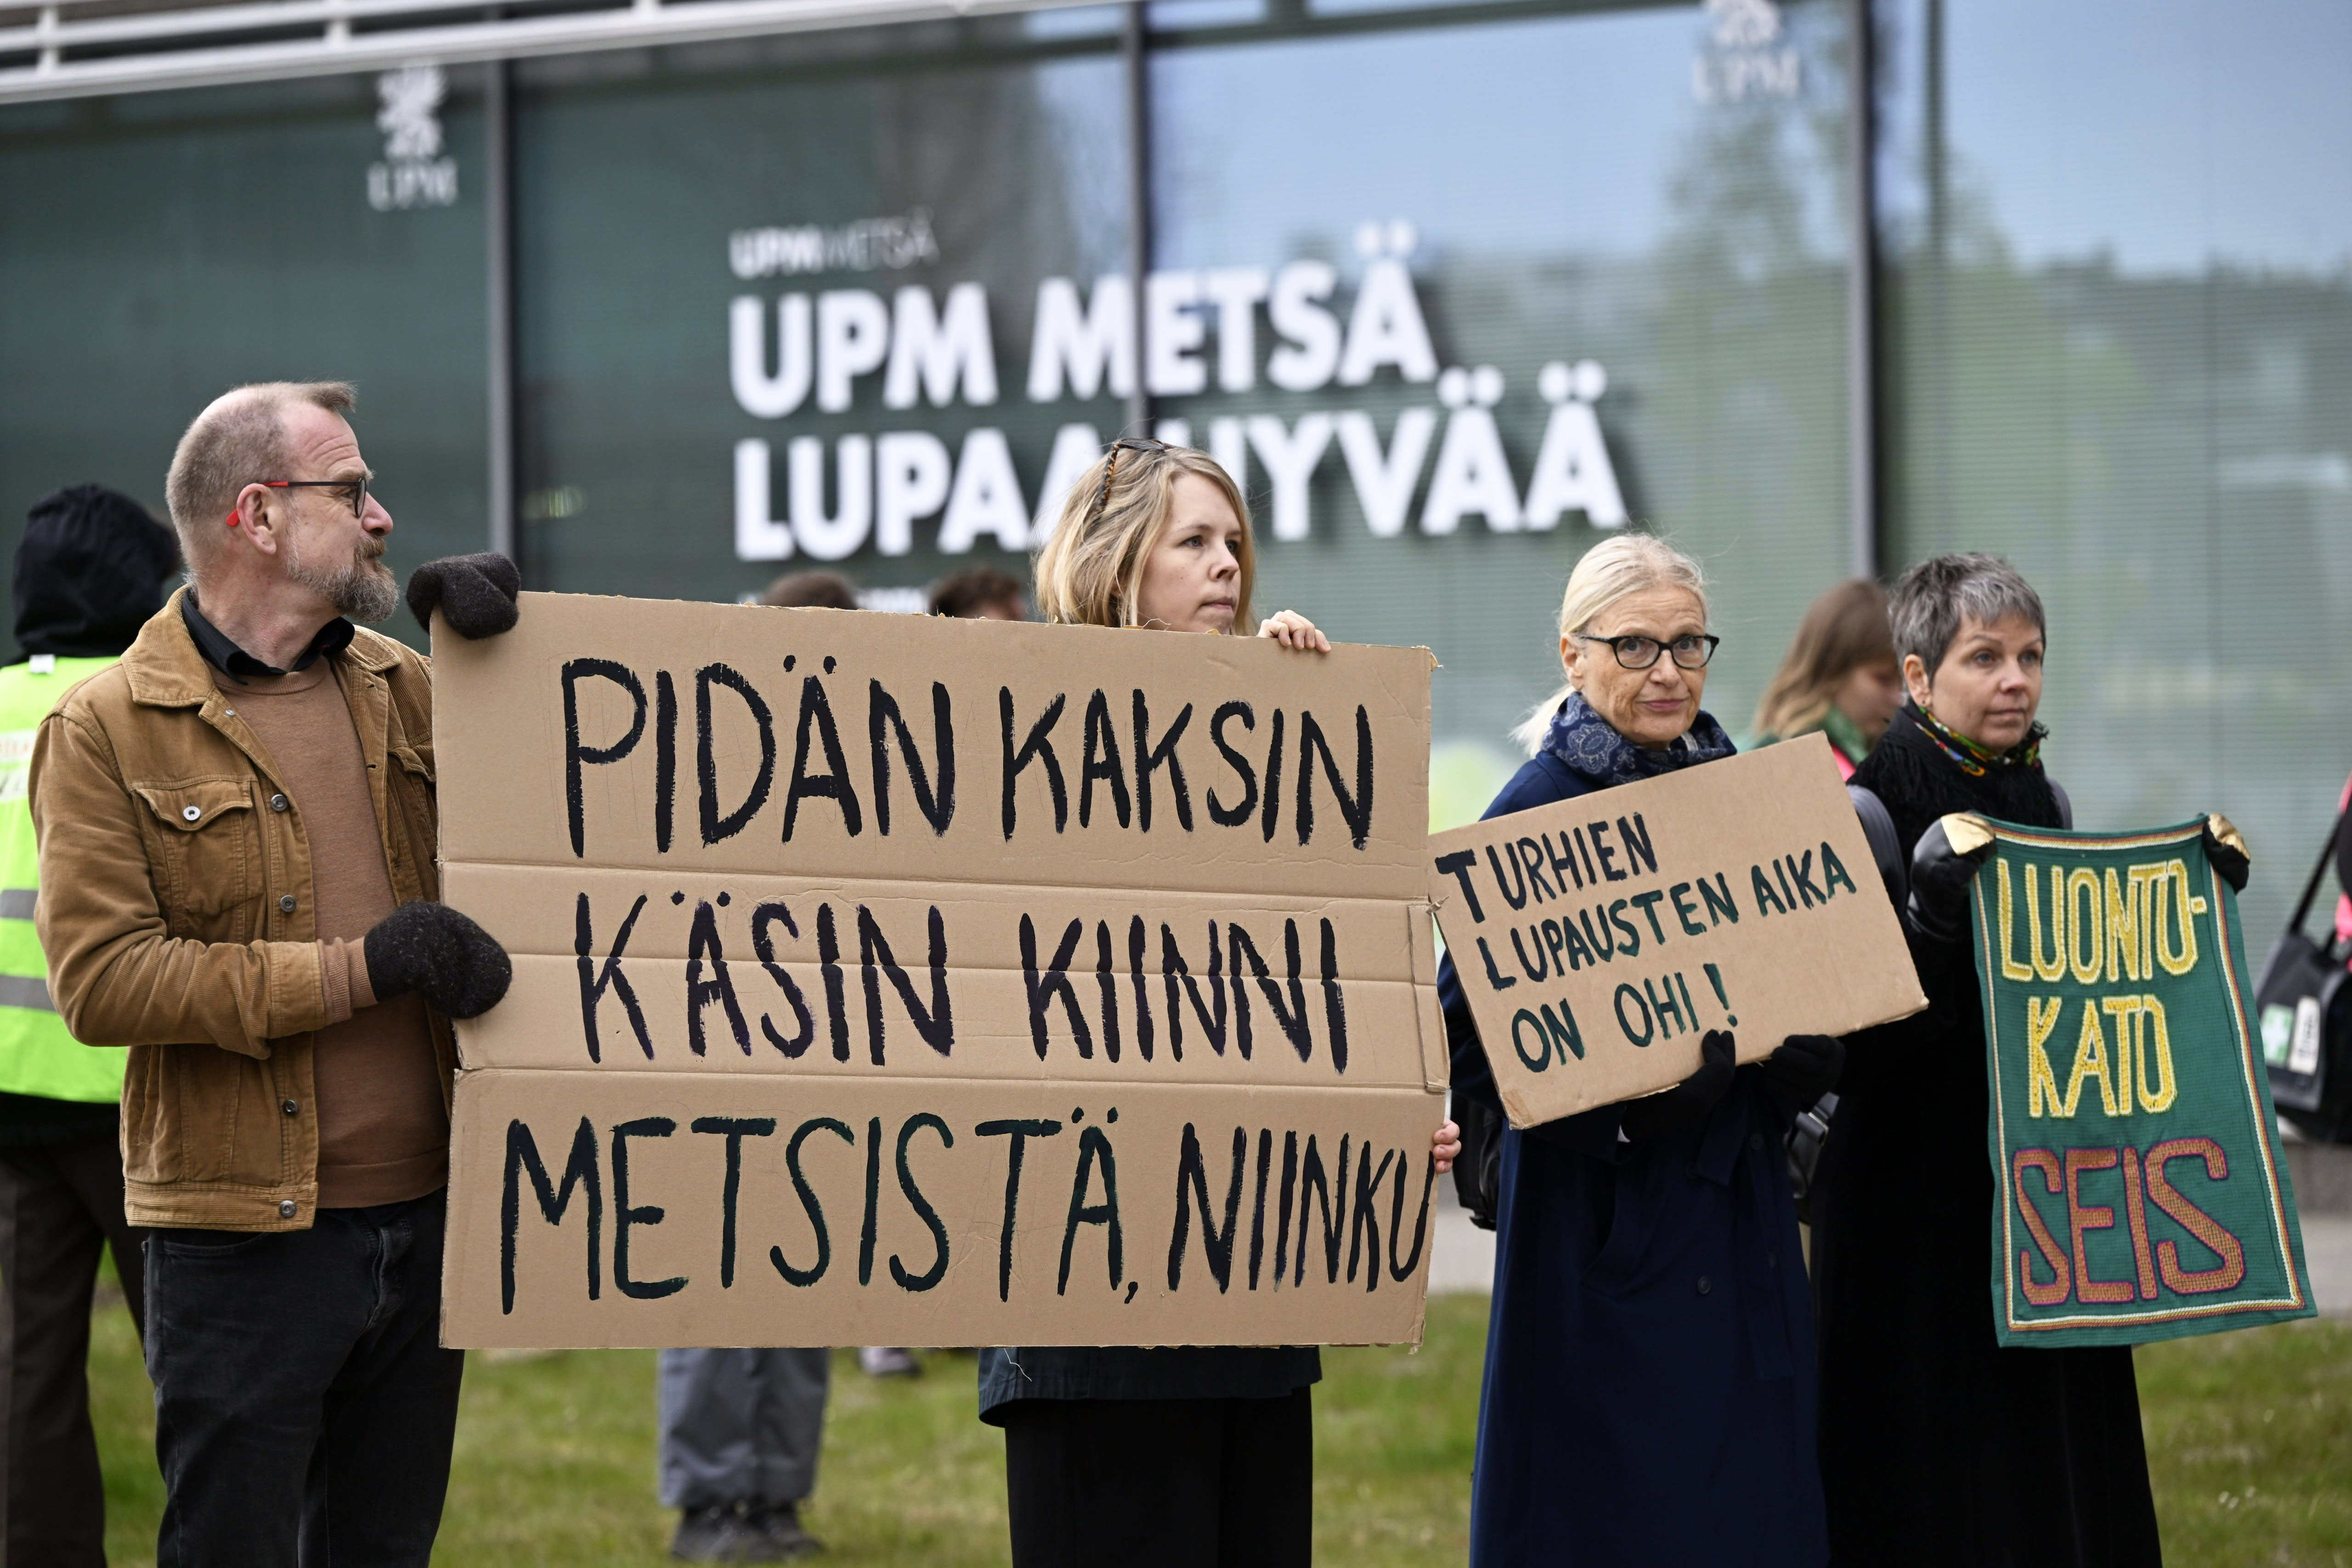 The Helsinki police arrested three climate protesters at UPM’s headquarters